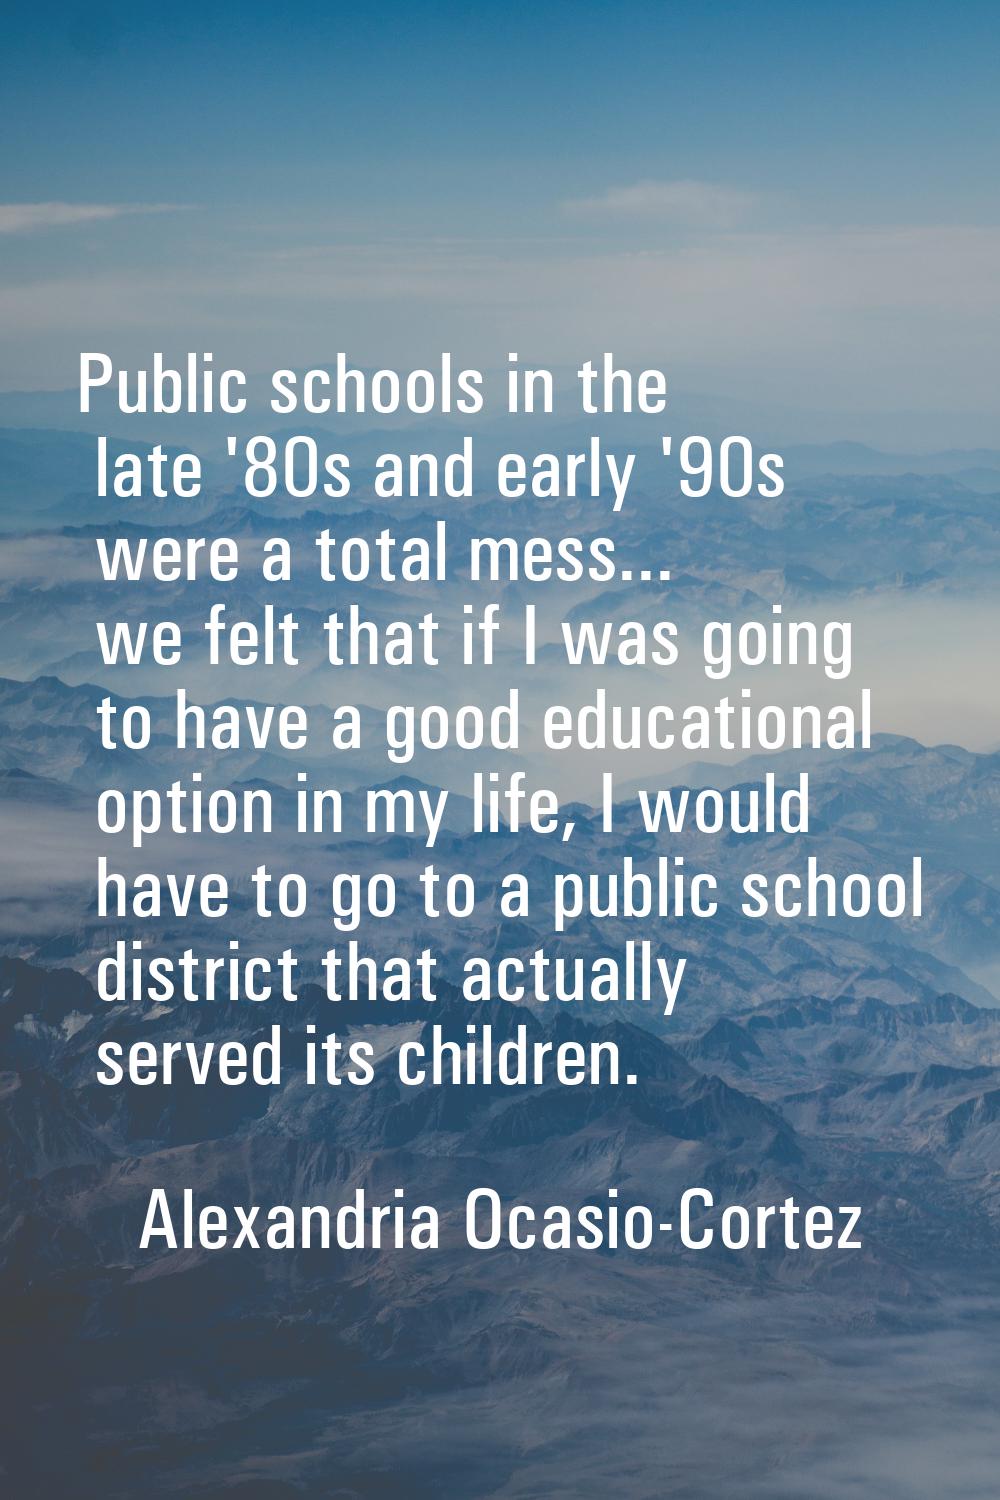 Public schools in the late '80s and early '90s were a total mess... we felt that if I was going to 